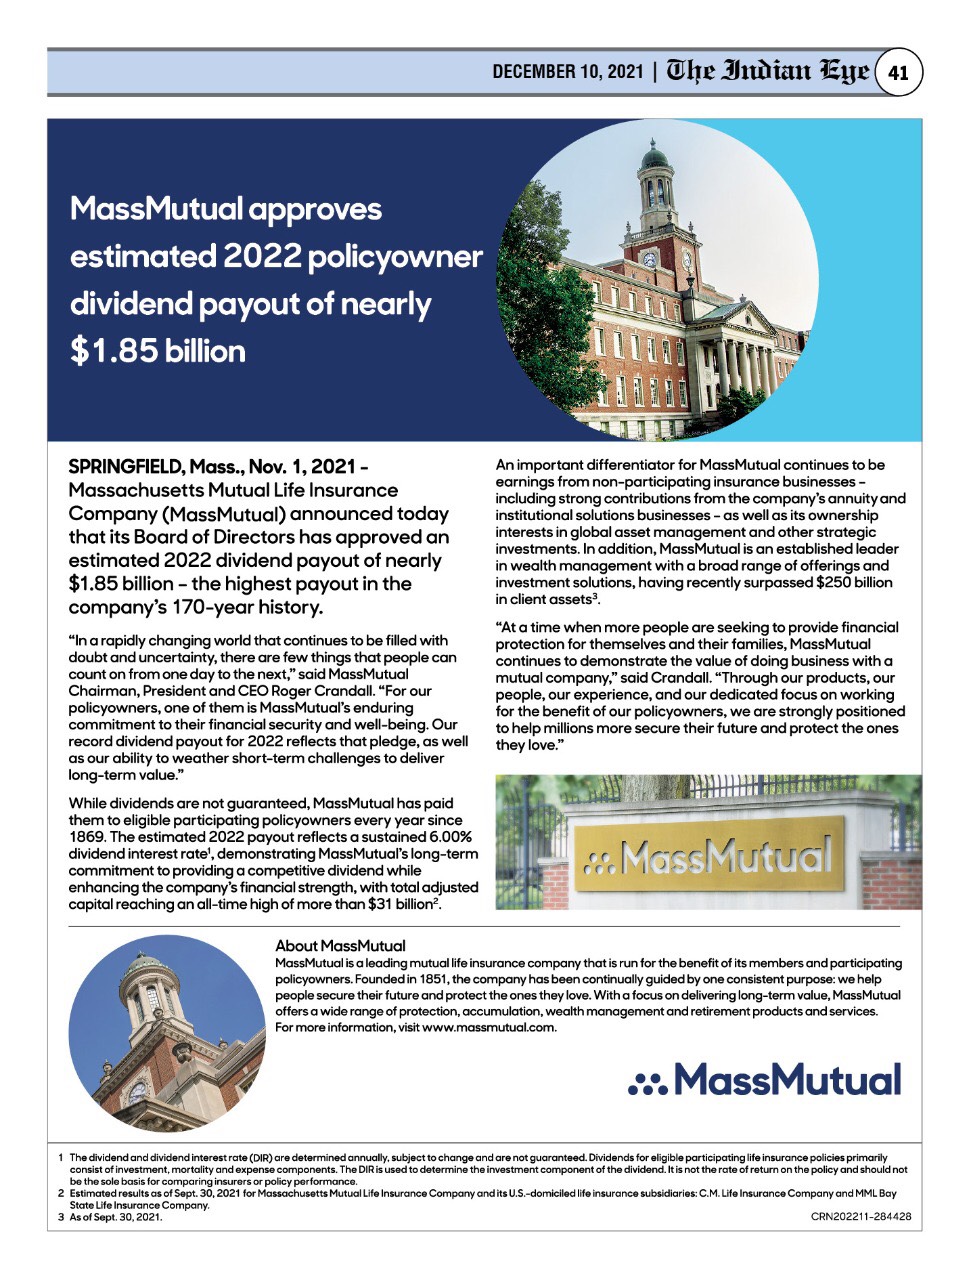 MassMutual approves estimated 2022 Policyowner dividend payout of nearly $1.85 billion